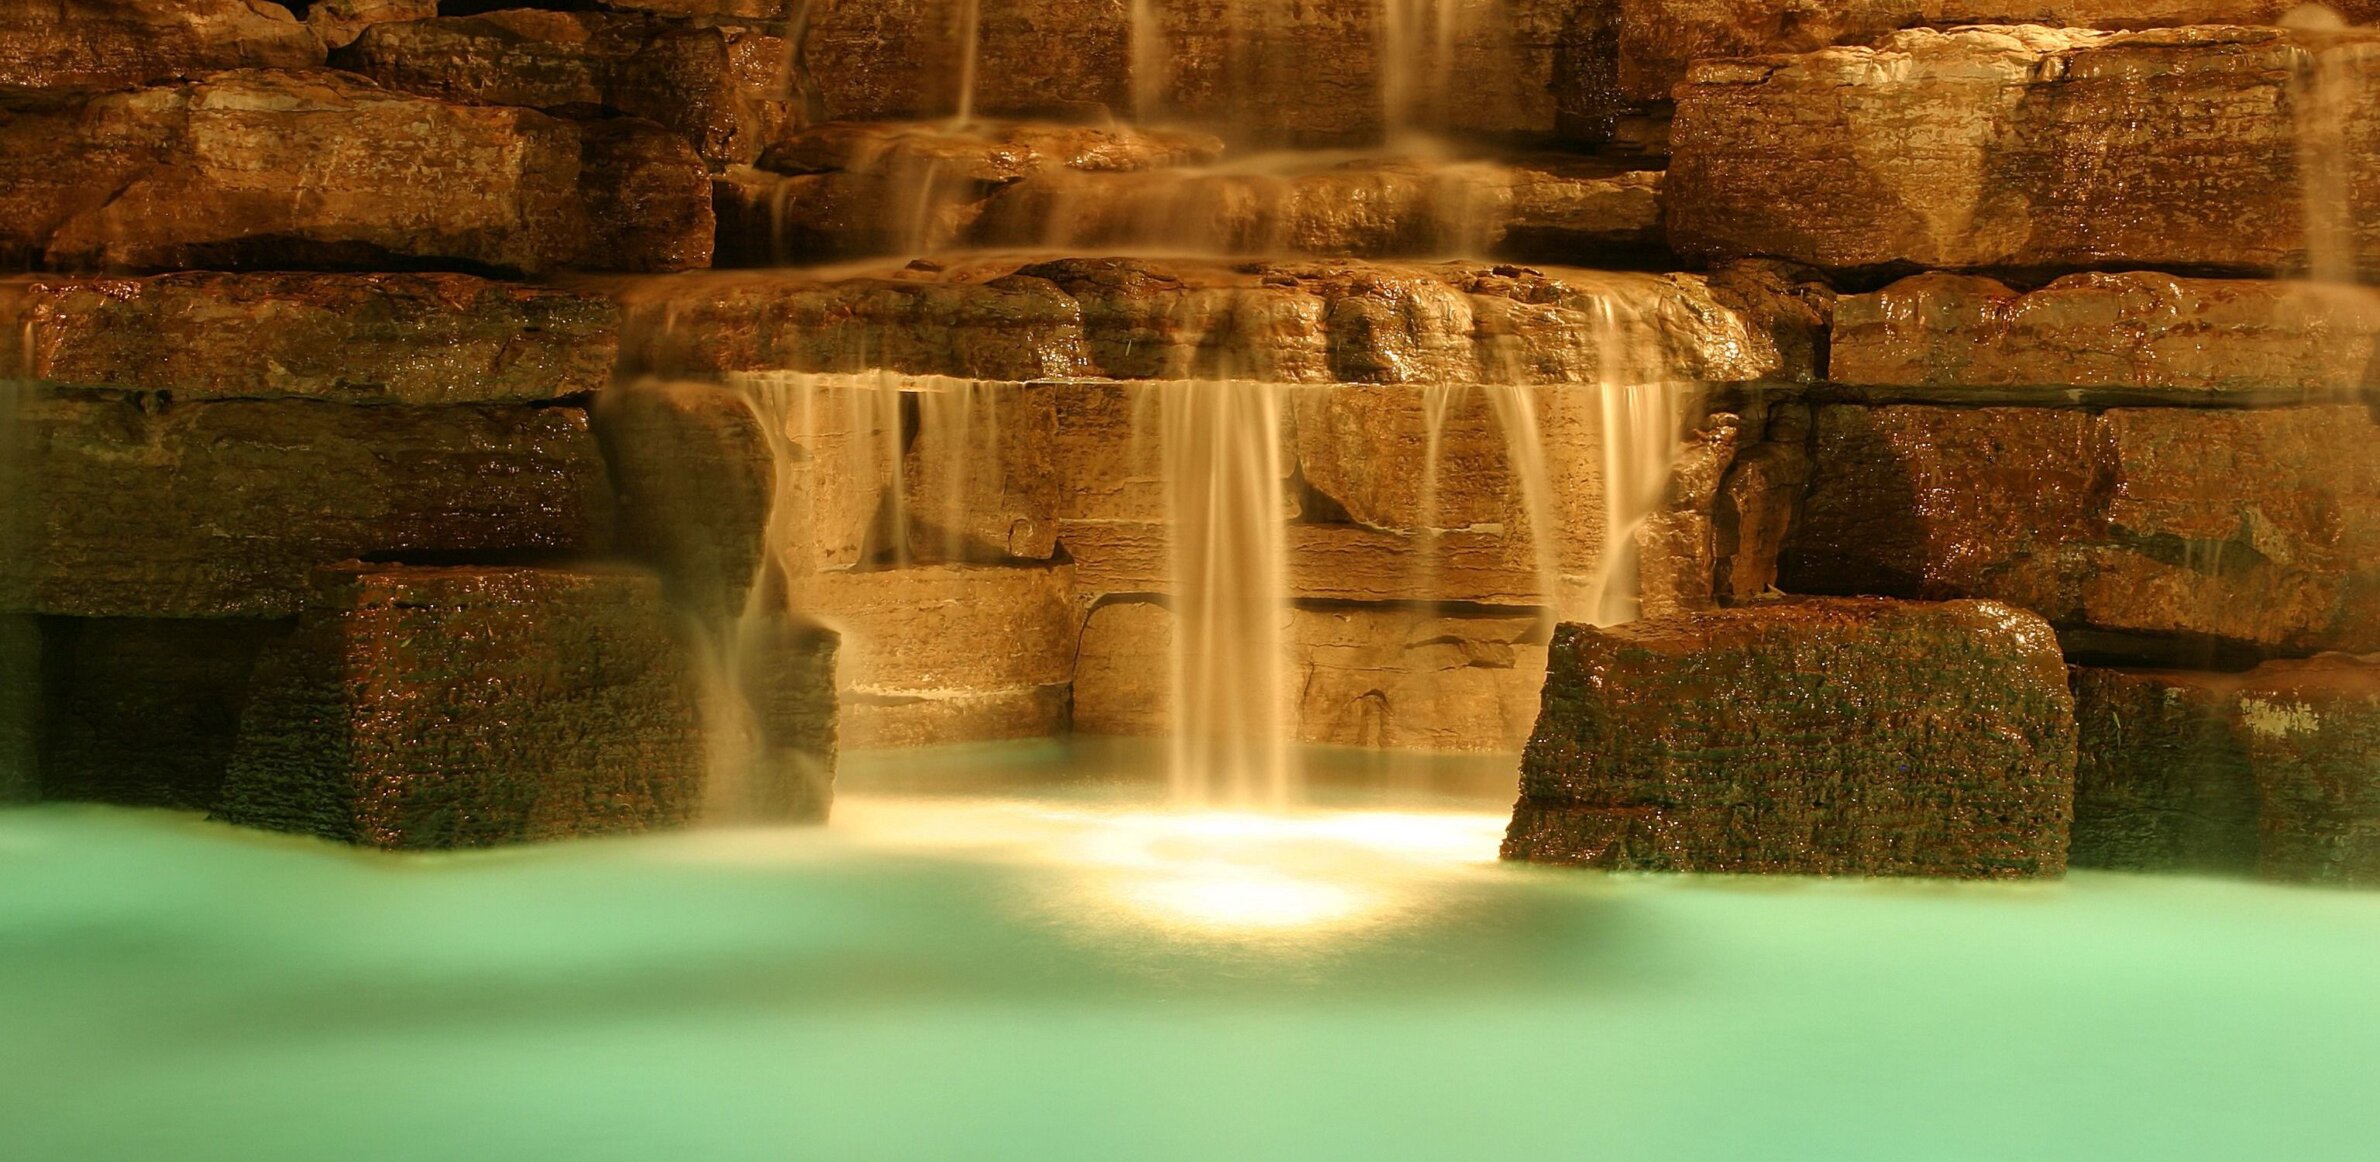 A serene, artificial waterfall cascades over mossy, illuminated rocks into a tranquil turquoise pool, likely in a garden or indoor setting.